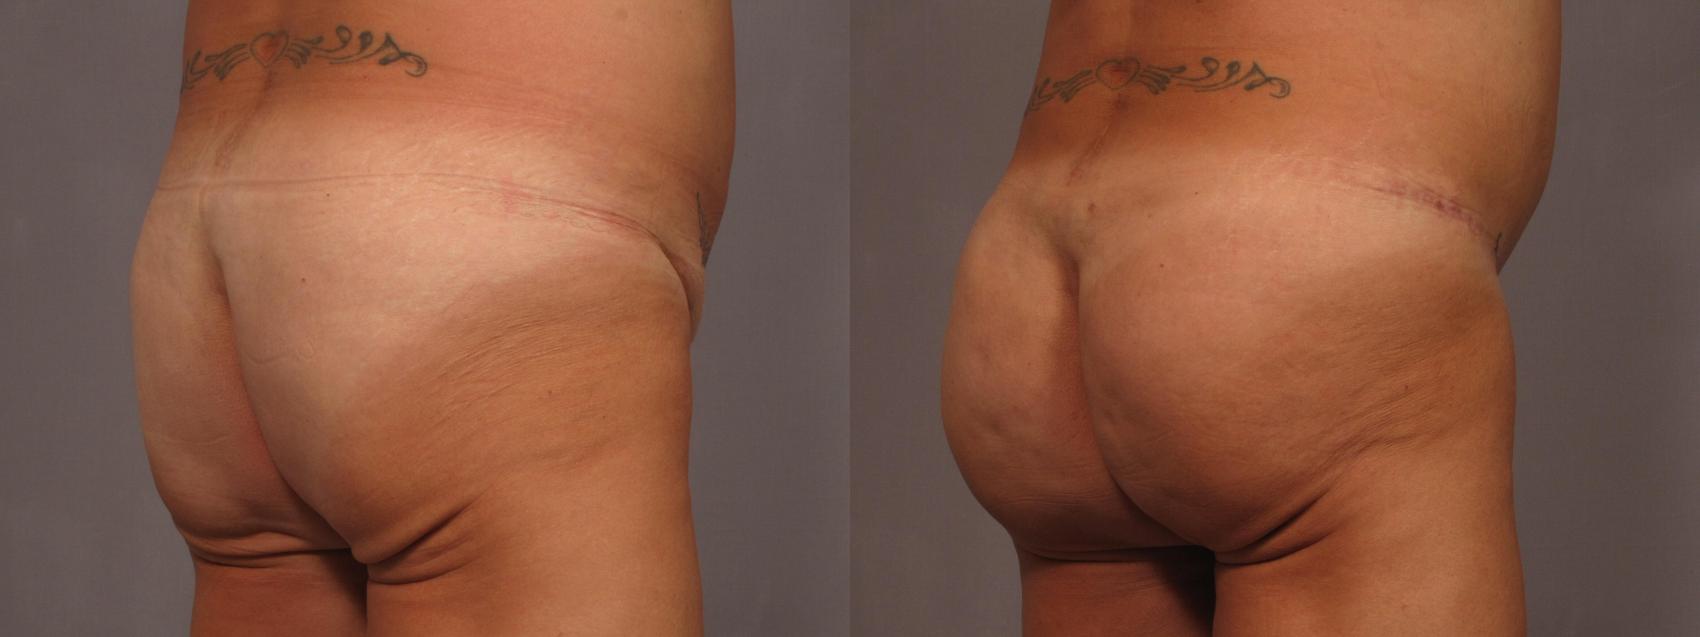 Brazilian Before and After Pictures 328 | Naples and Ft. Myers, FL | Kent V. Hasen, MD: Aesthetic Plastic Surgery & Med Spa of